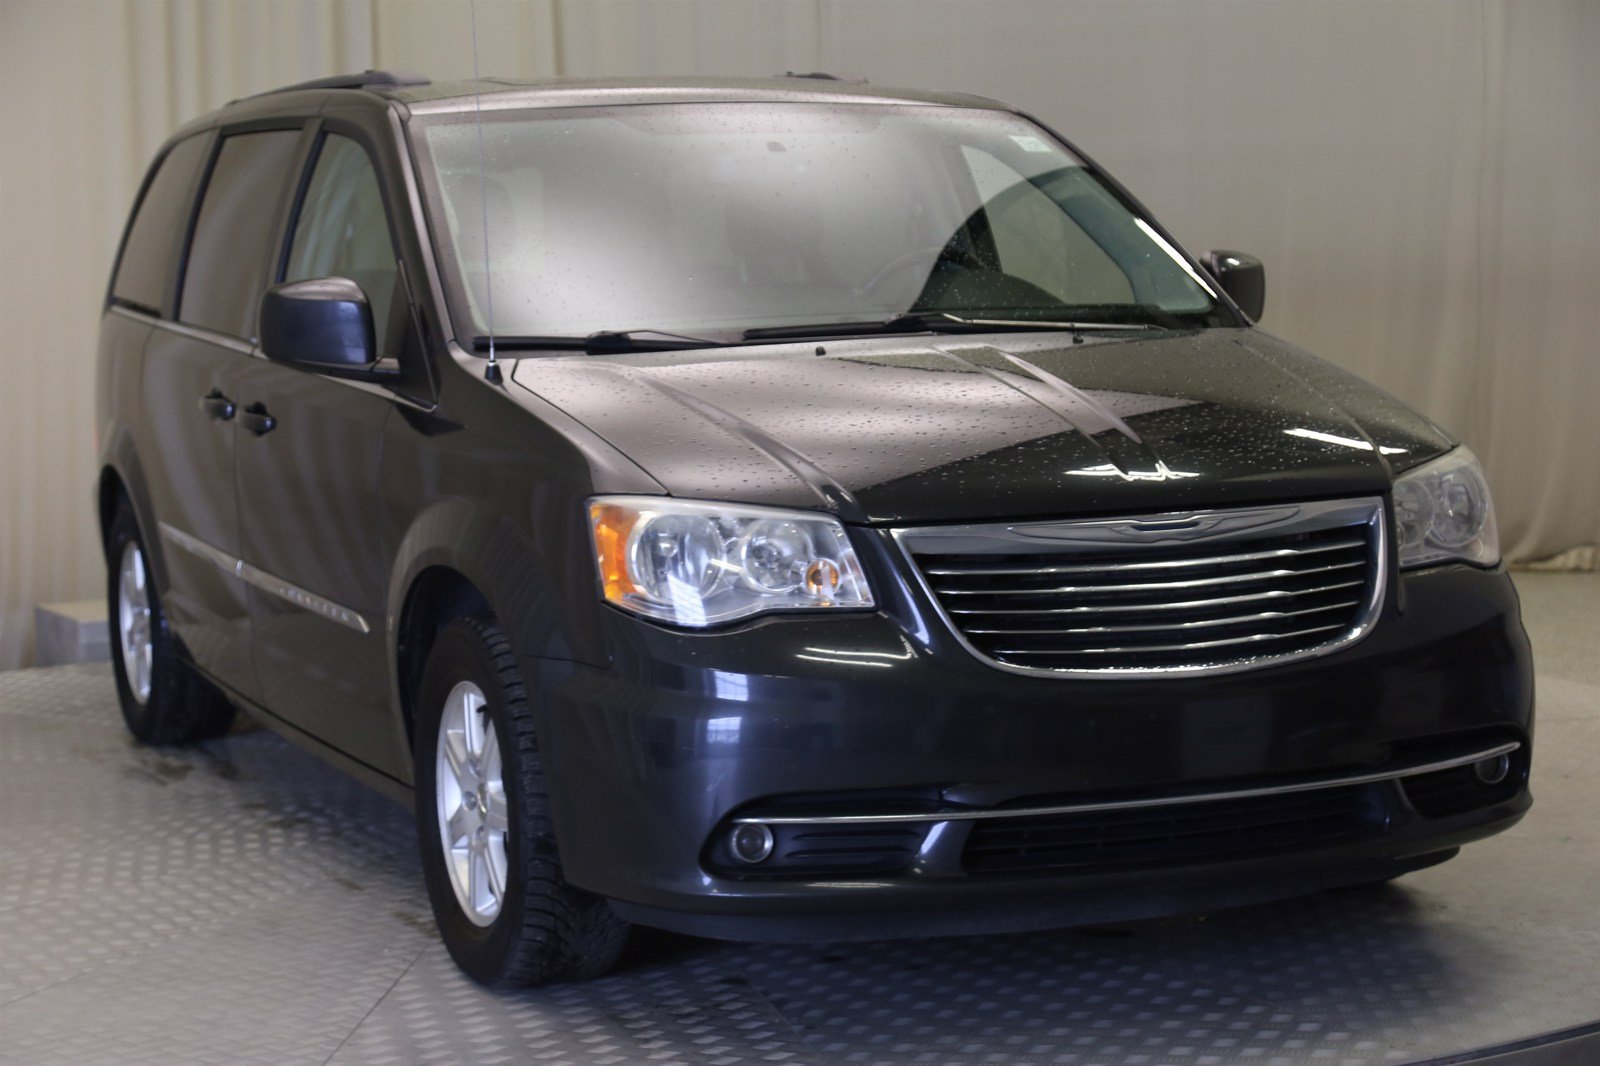 PreOwned 2011 Chrysler Town & Country Touring Minivan in